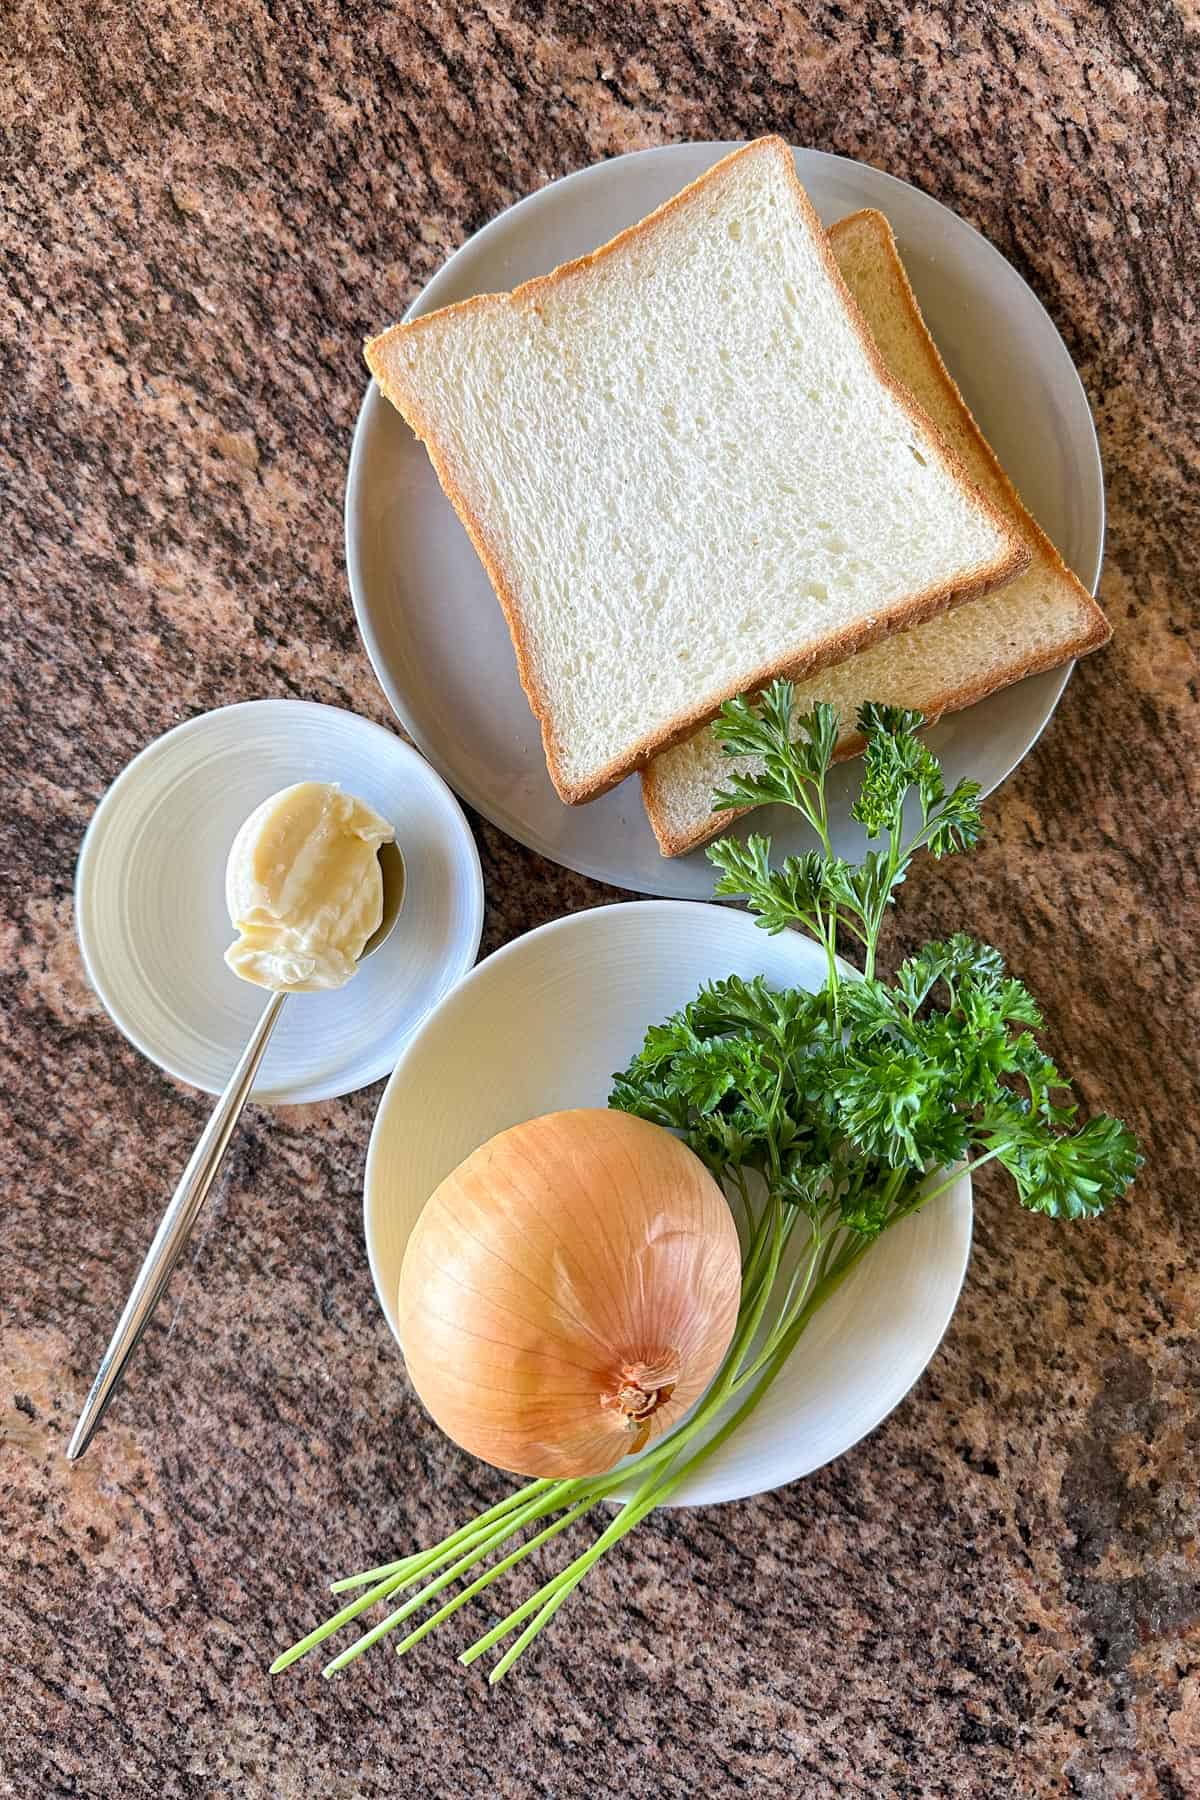 Ingredients for onion sandwich on a table (bread, onions, parsley, mayo).